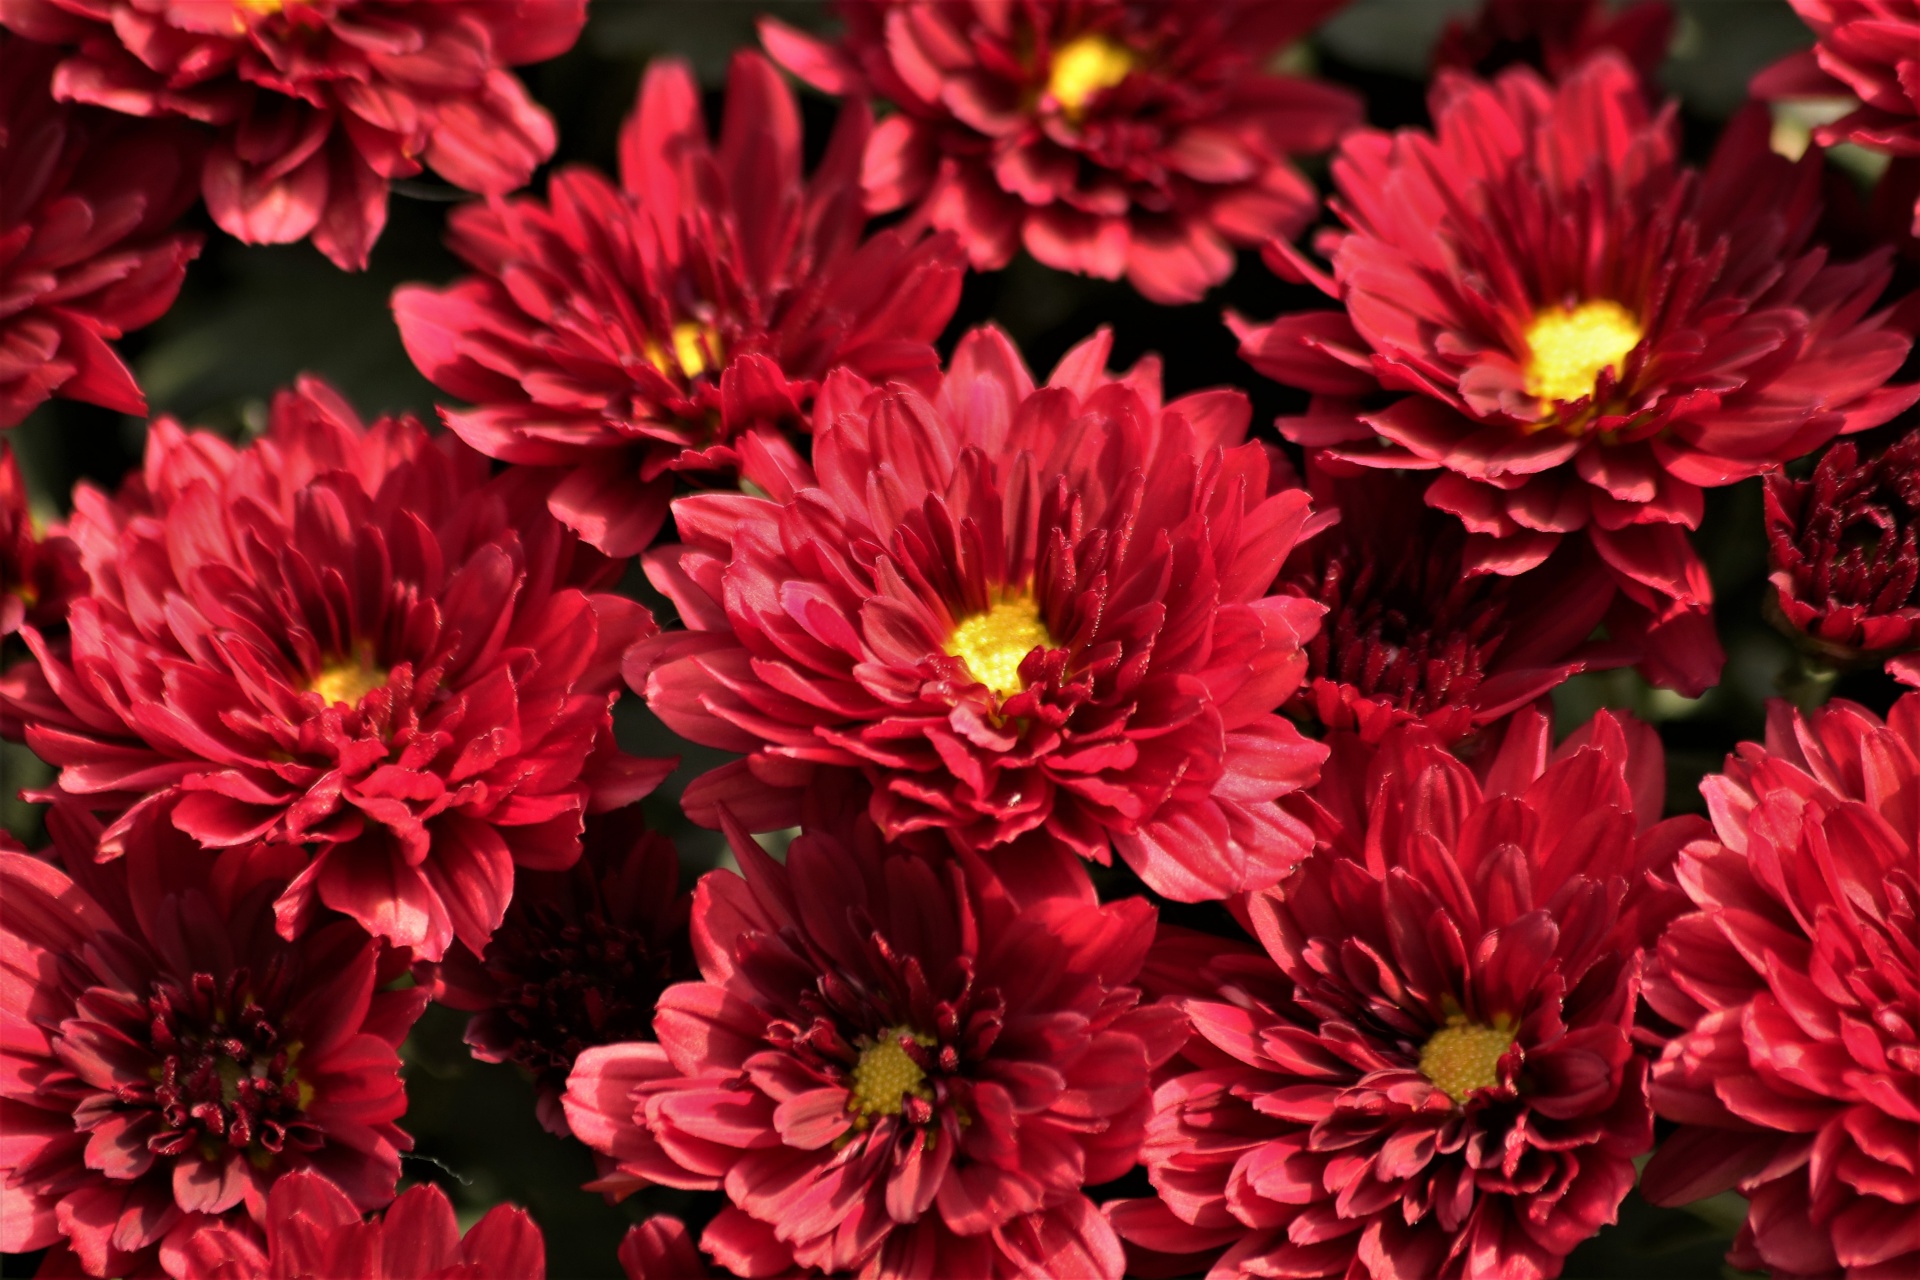 Full frame close-up of red chrysanthemum flowers with yellow centers.